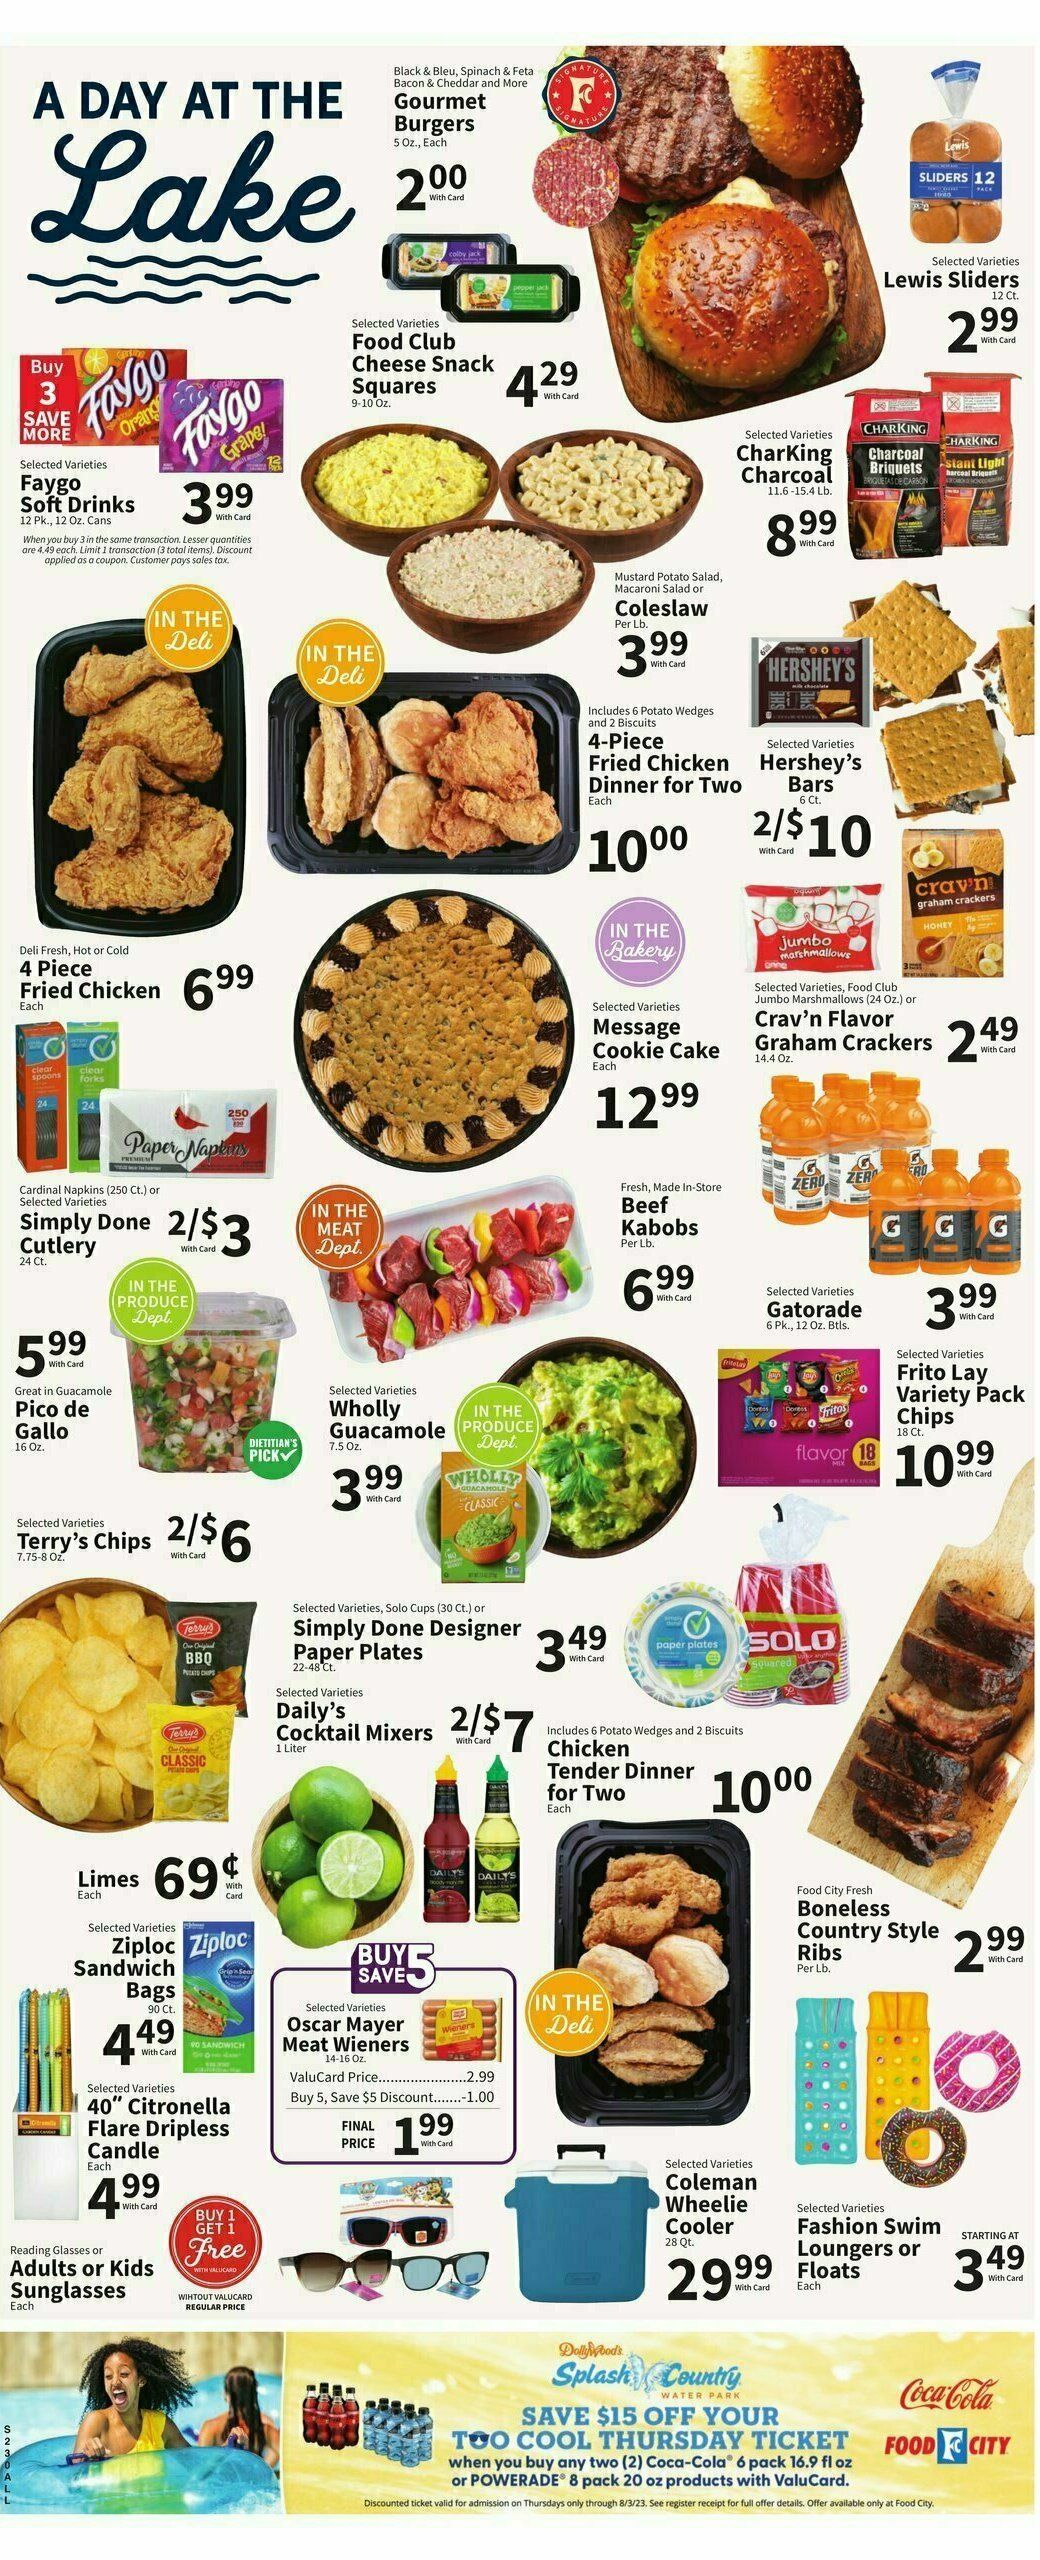 Food City Weekly Ad from July 19